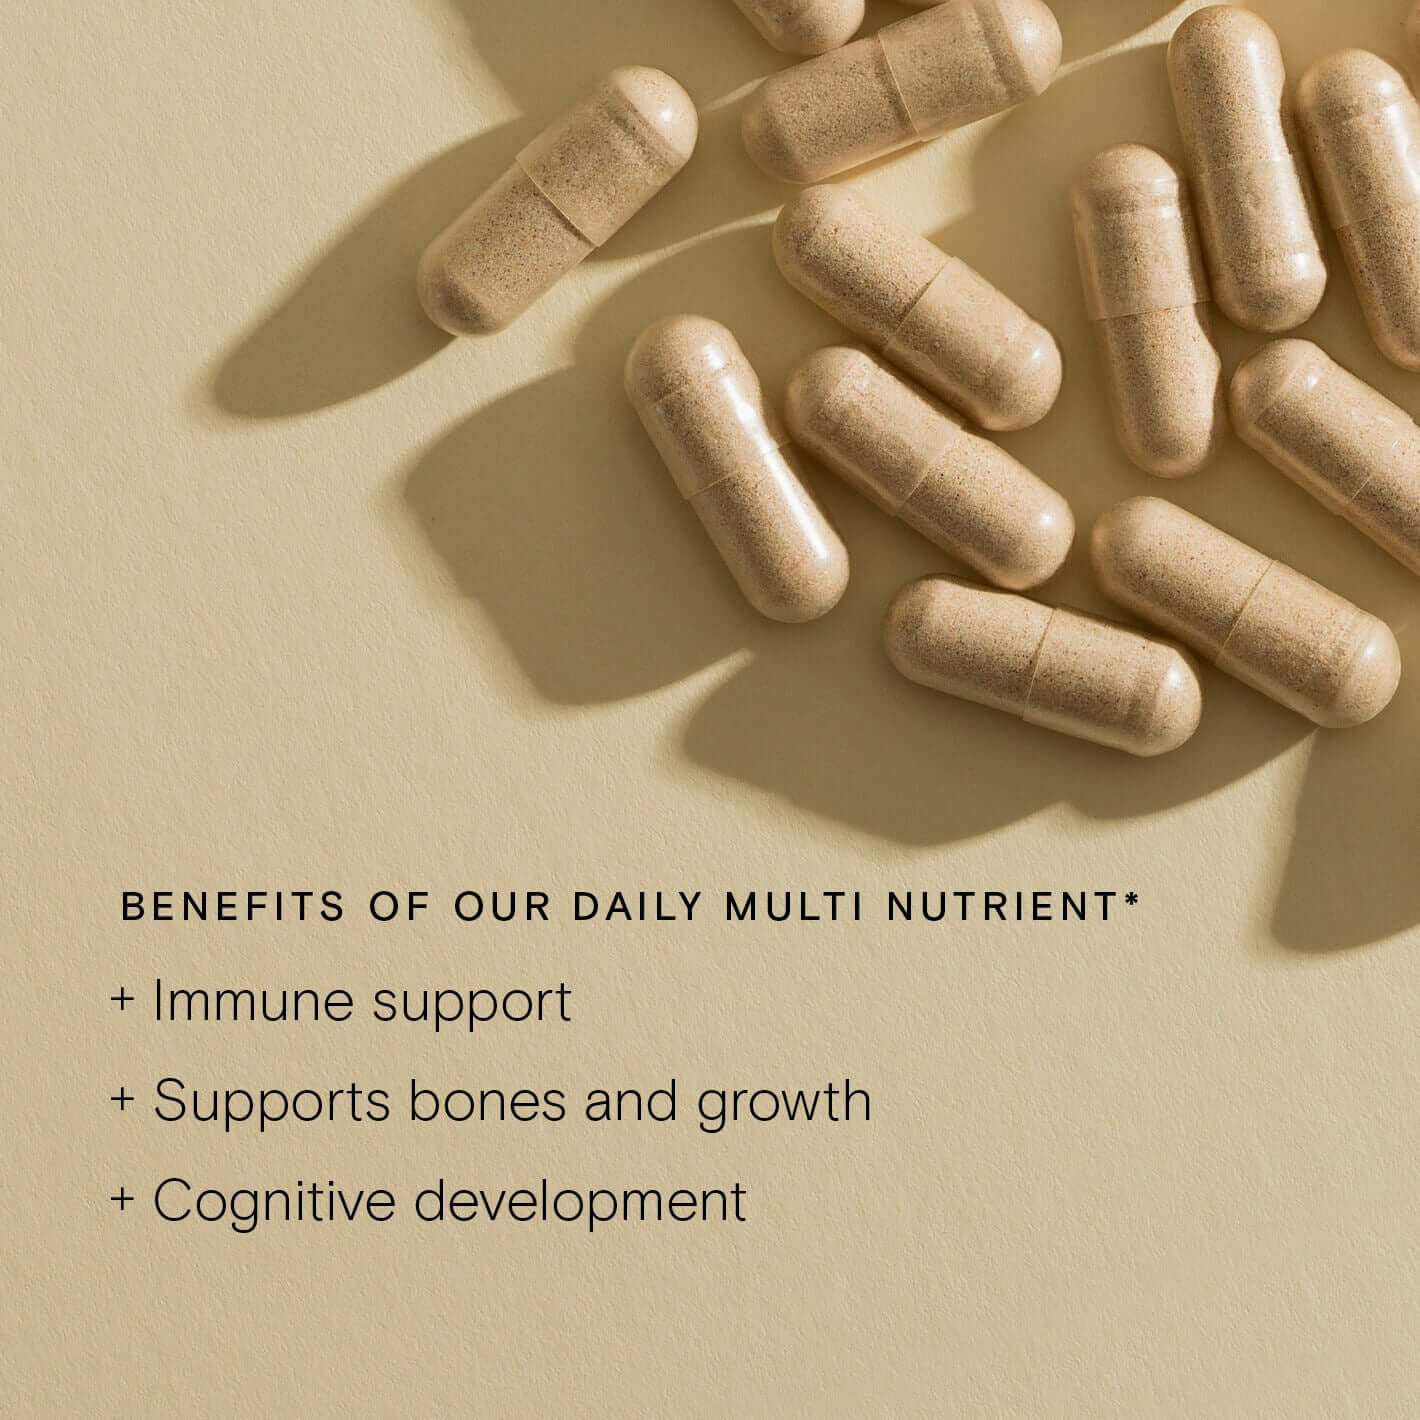 Food-Grown® Child's Daily Multi Nutrient